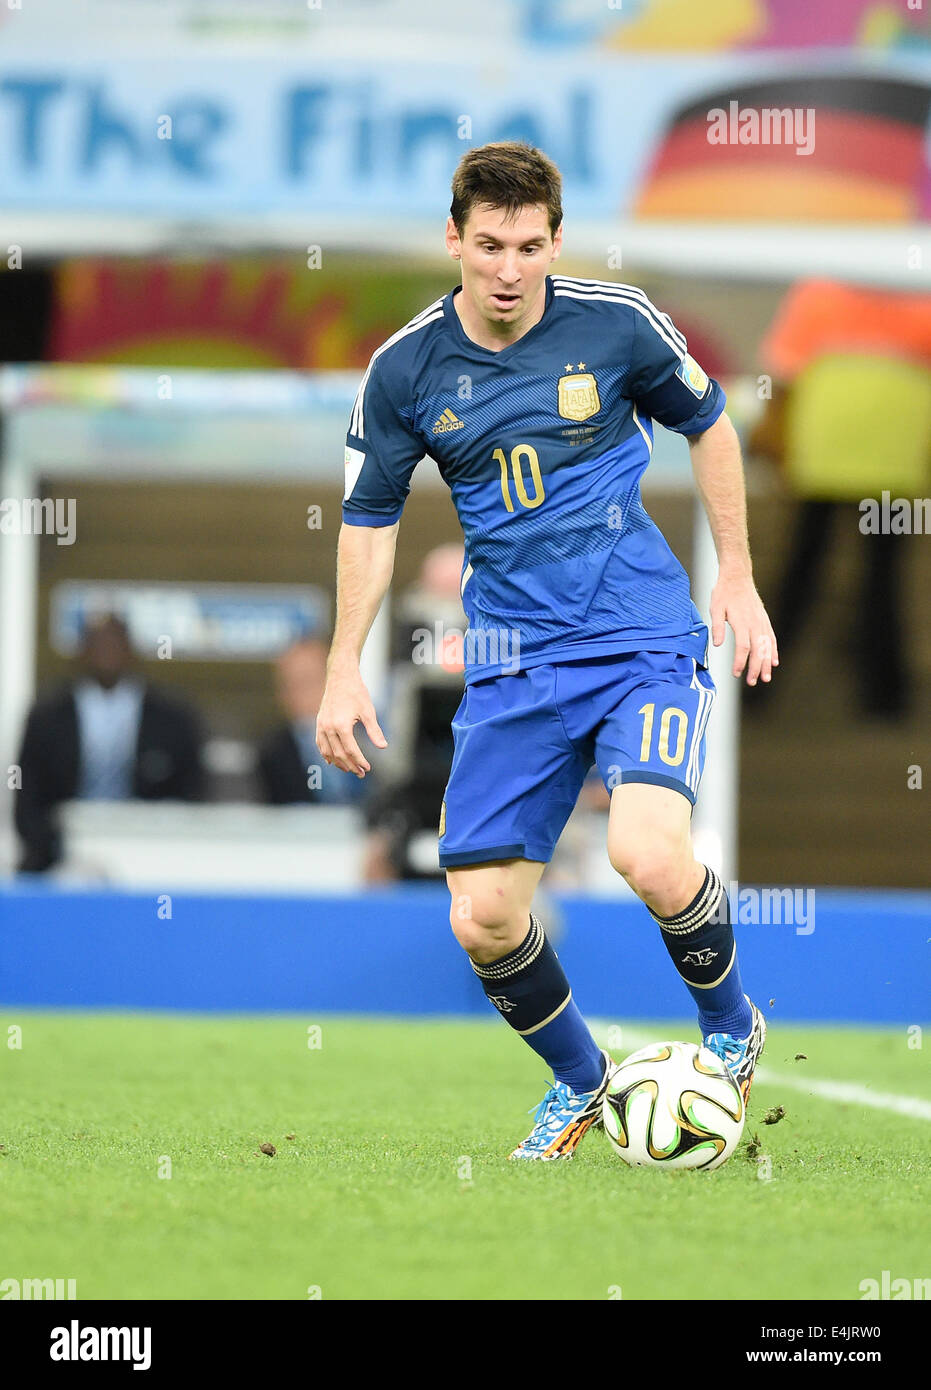 Rio de Janeiro, Brazil. 13th July, 2014. Lionel Messi of Argentina in action during the FIFA World Cup 2014 final soccer match between Germany and Argentina at the Estadio do Maracana in Rio de Janeiro, Brazil, 13 July 2014. Photo: Marcus Brandt/dpa/Alamy Live News Stock Photo